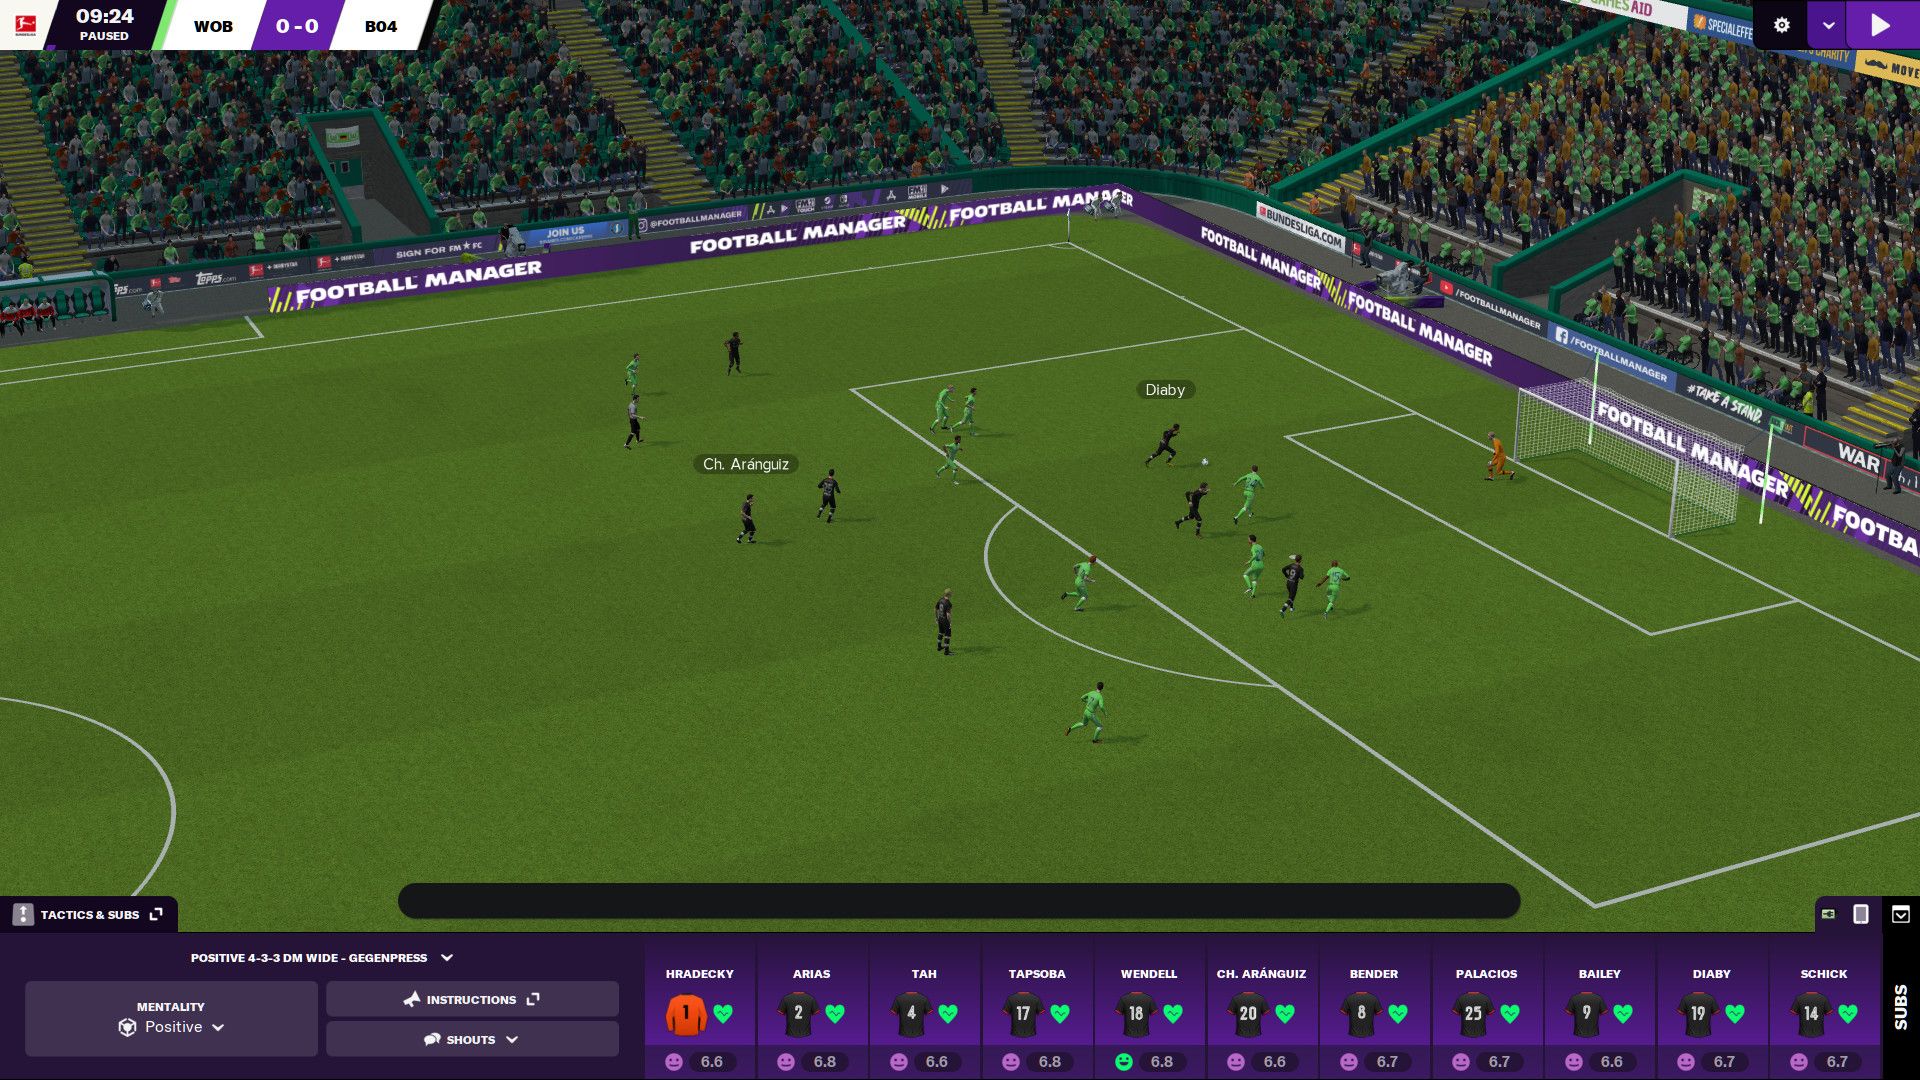 football manager 2021 apk download